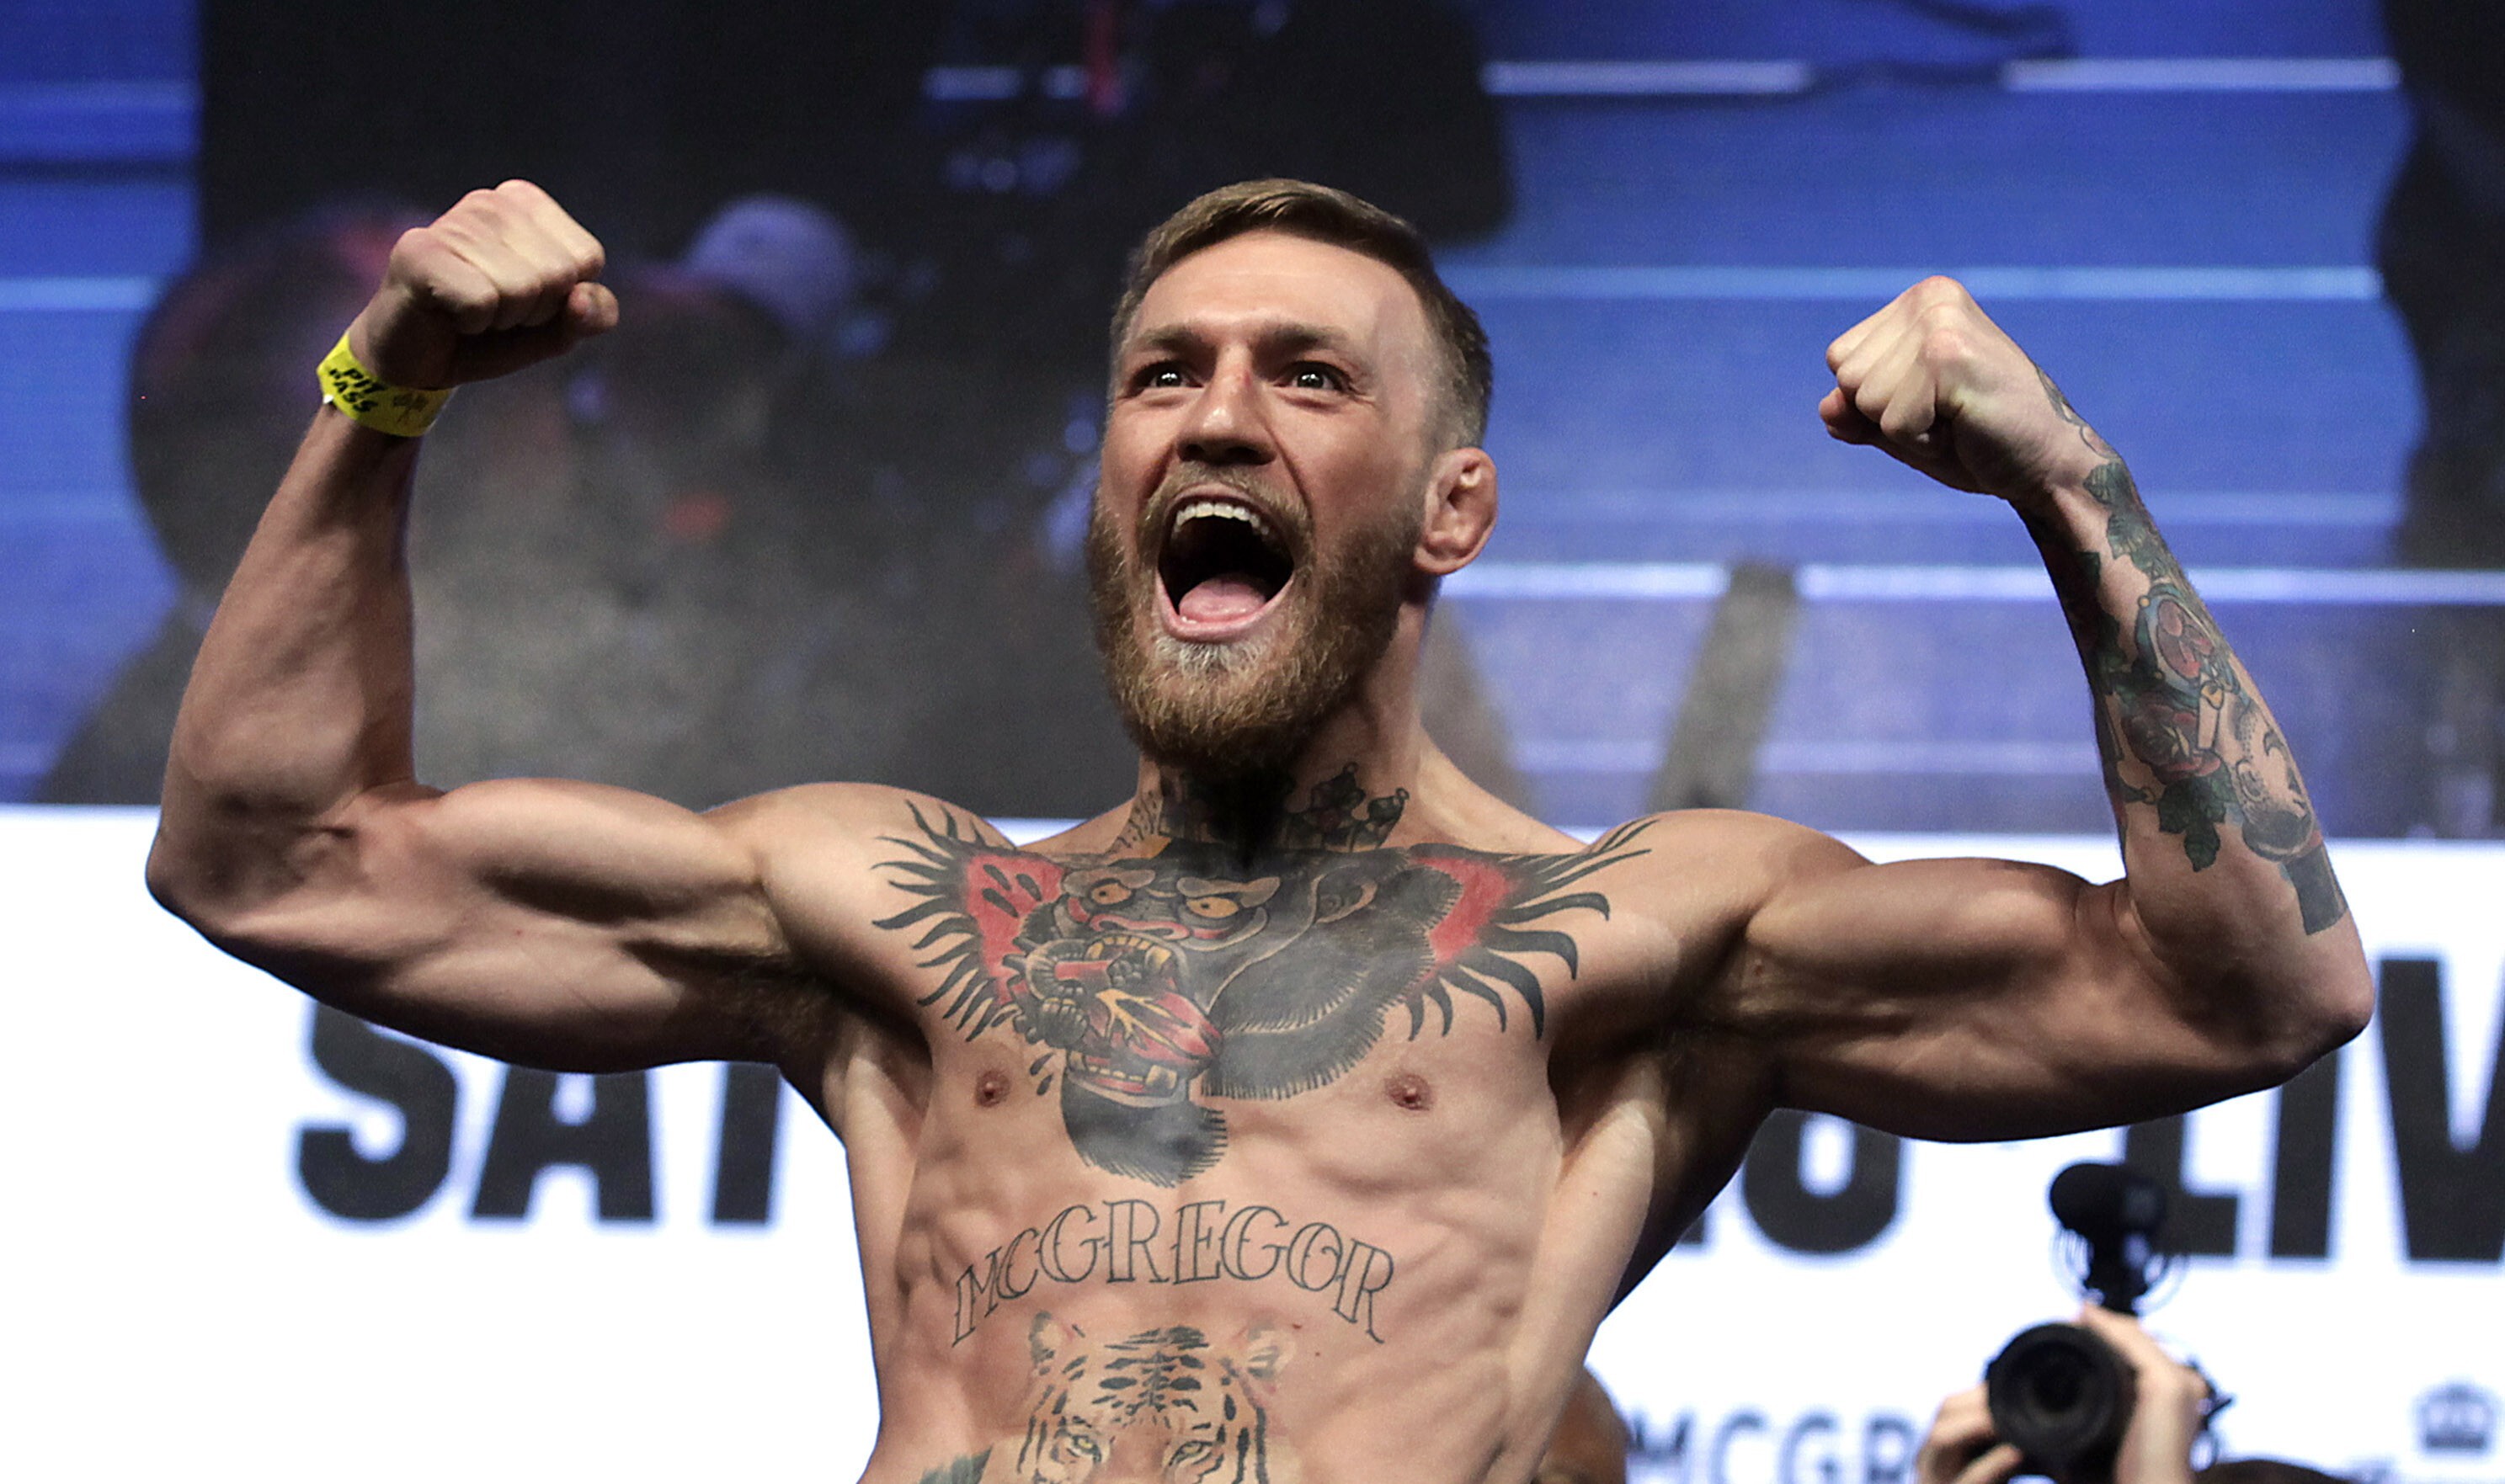 MMA figher Connor Mcgregor was taken into custody in Corsica on suspicion of attempted sexual assault on September 12. Photo by John Gurzinski / AFP